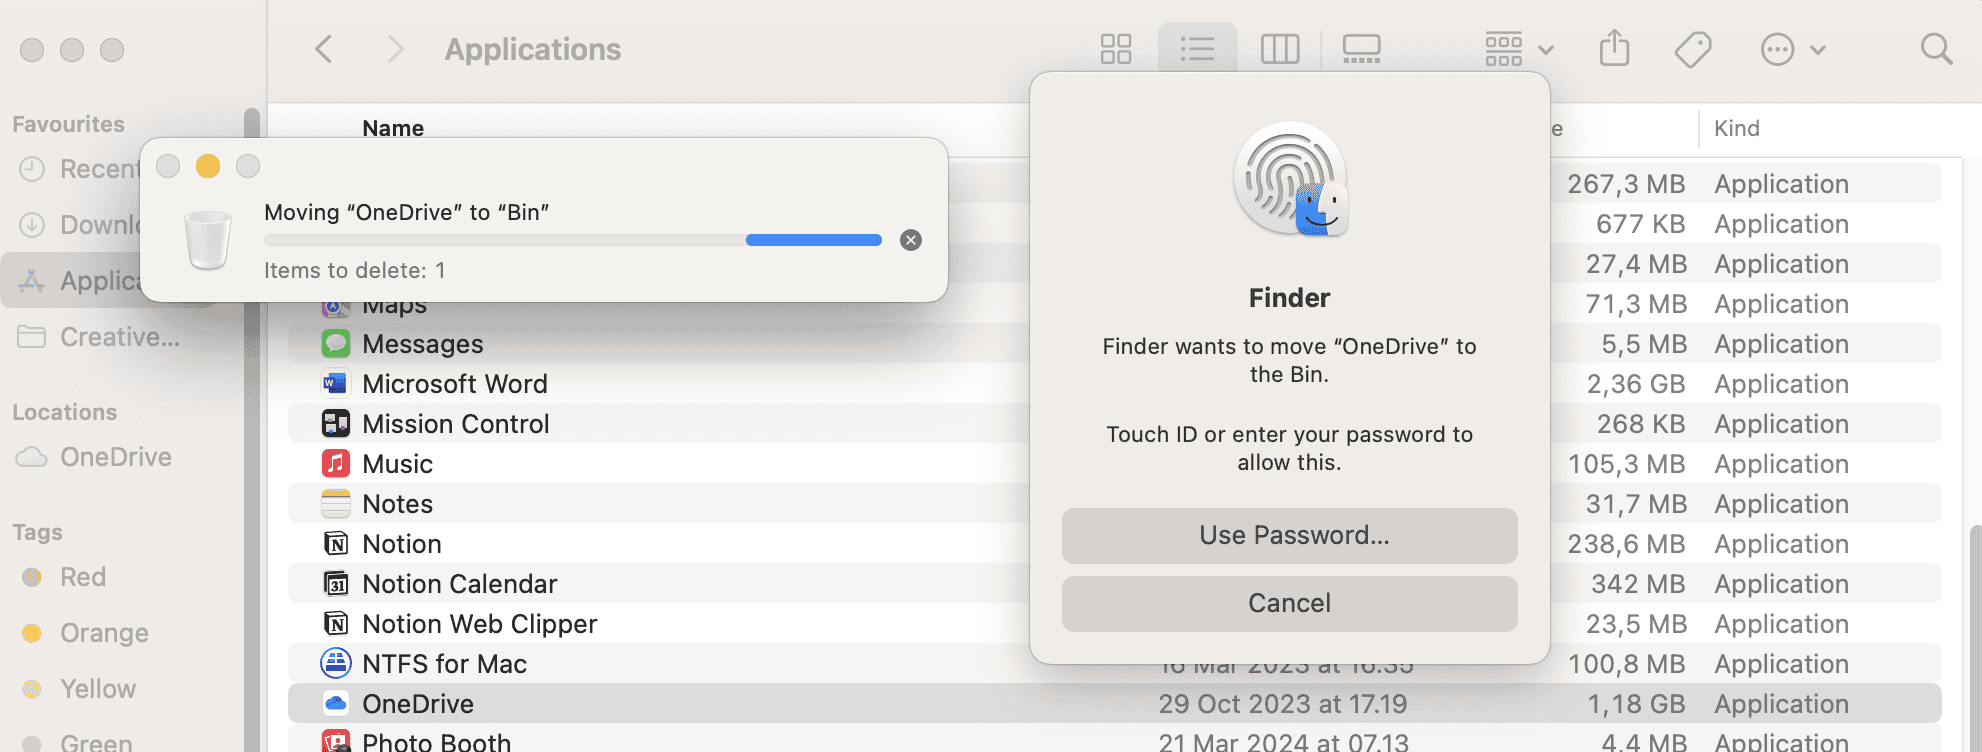 confirm that you want to delete an app in the finder app 